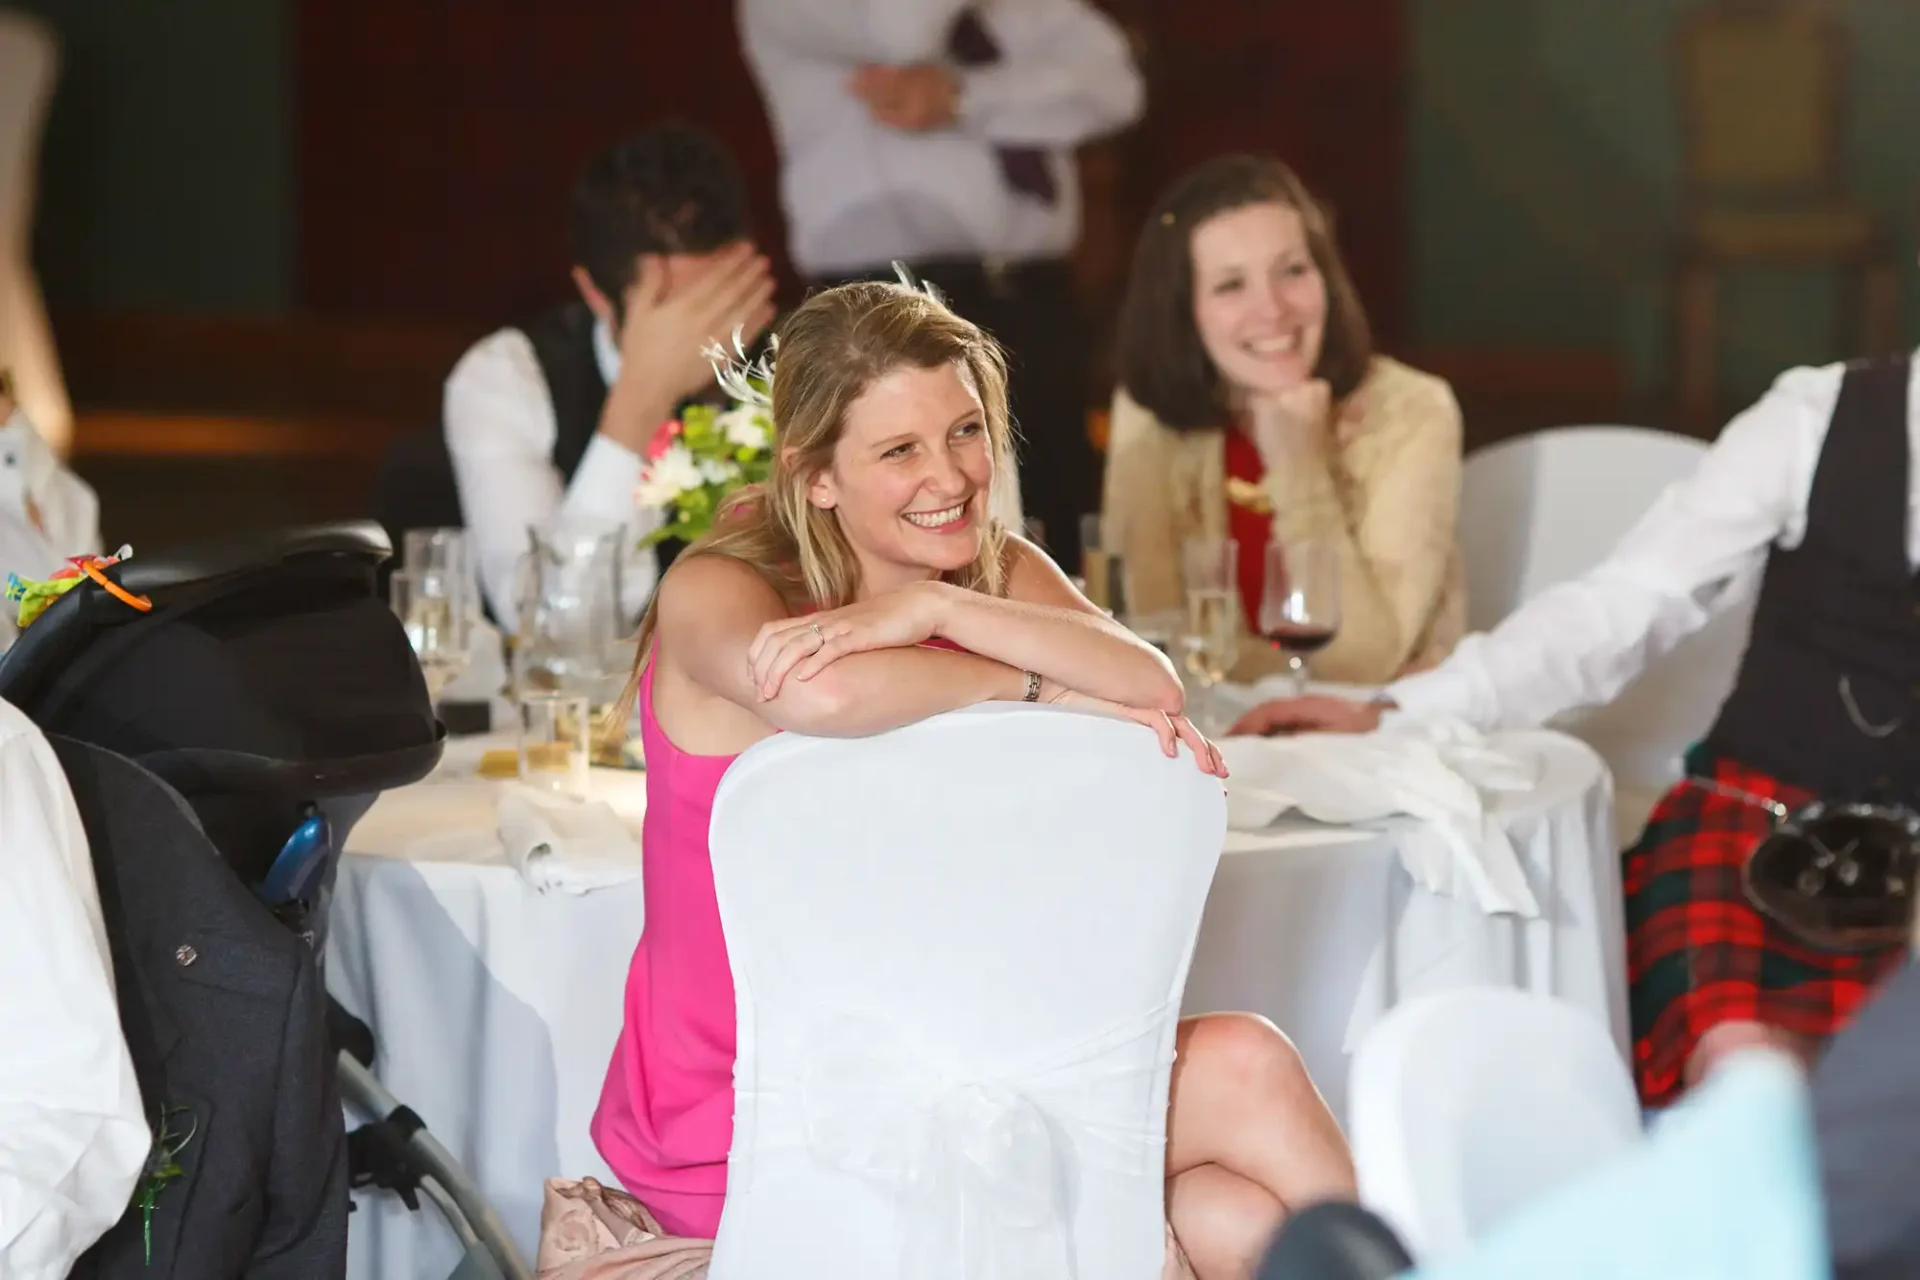 A woman in a white dress smiling at a wedding reception table, with guests in the background, one covering his face and another laughing.